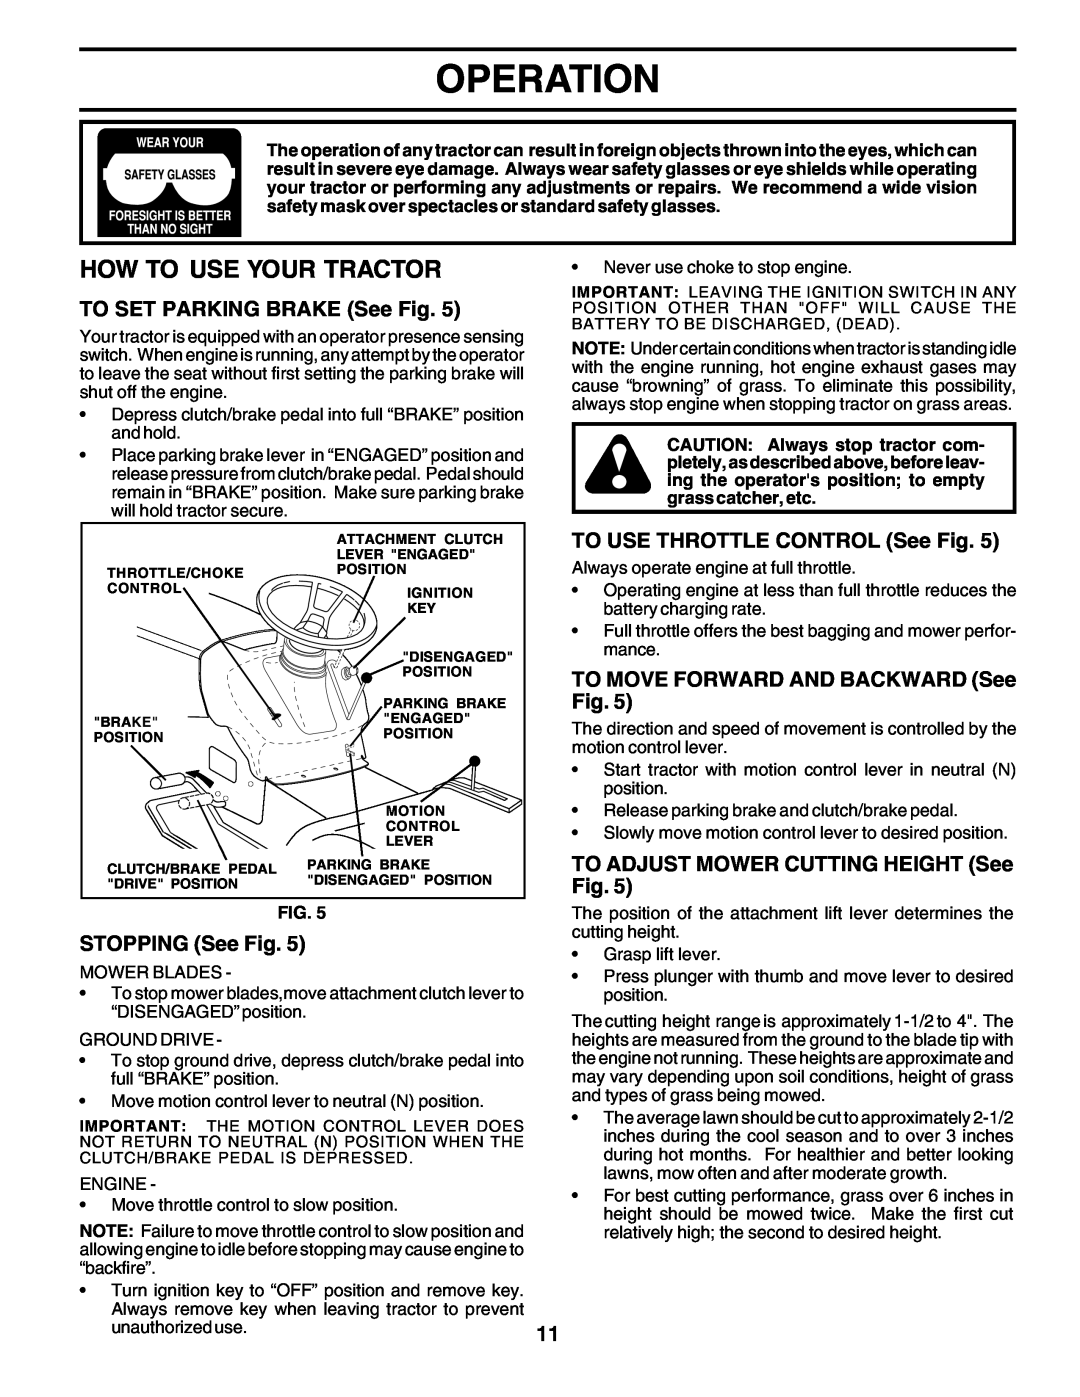 Weed Eater S165H42D owner manual How To Use Your Tractor, Operation, TO SET PARKING BRAKE See Fig, STOPPING See Fig 